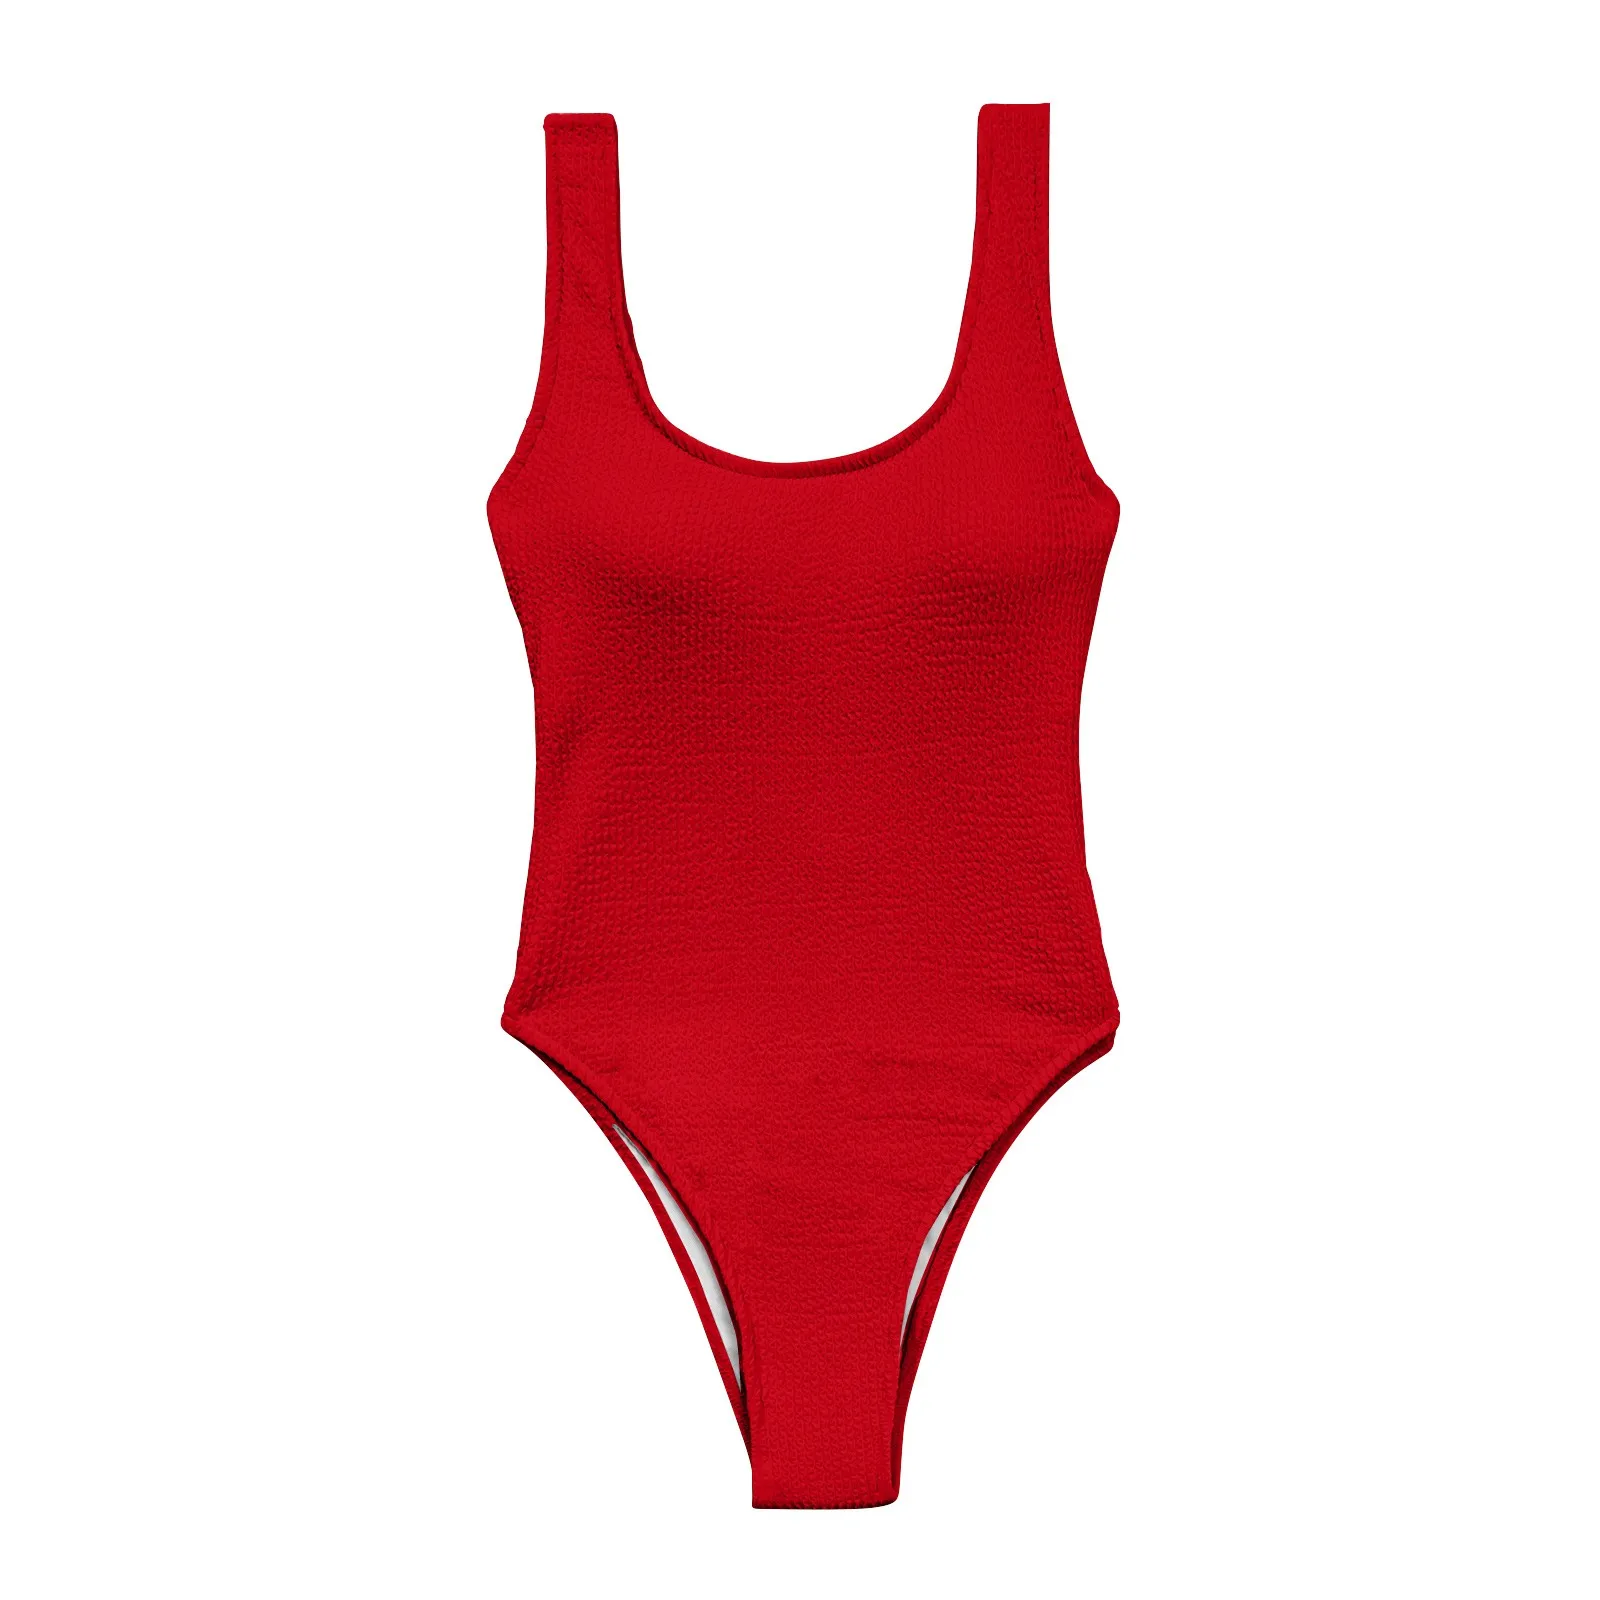 Sexy Women One Piece Swimsuit 2022 New Solid Push Up Thong Swimwear Bathing Suit Female Backless Bodysuit Monokini Swimming Suit long beach dresses